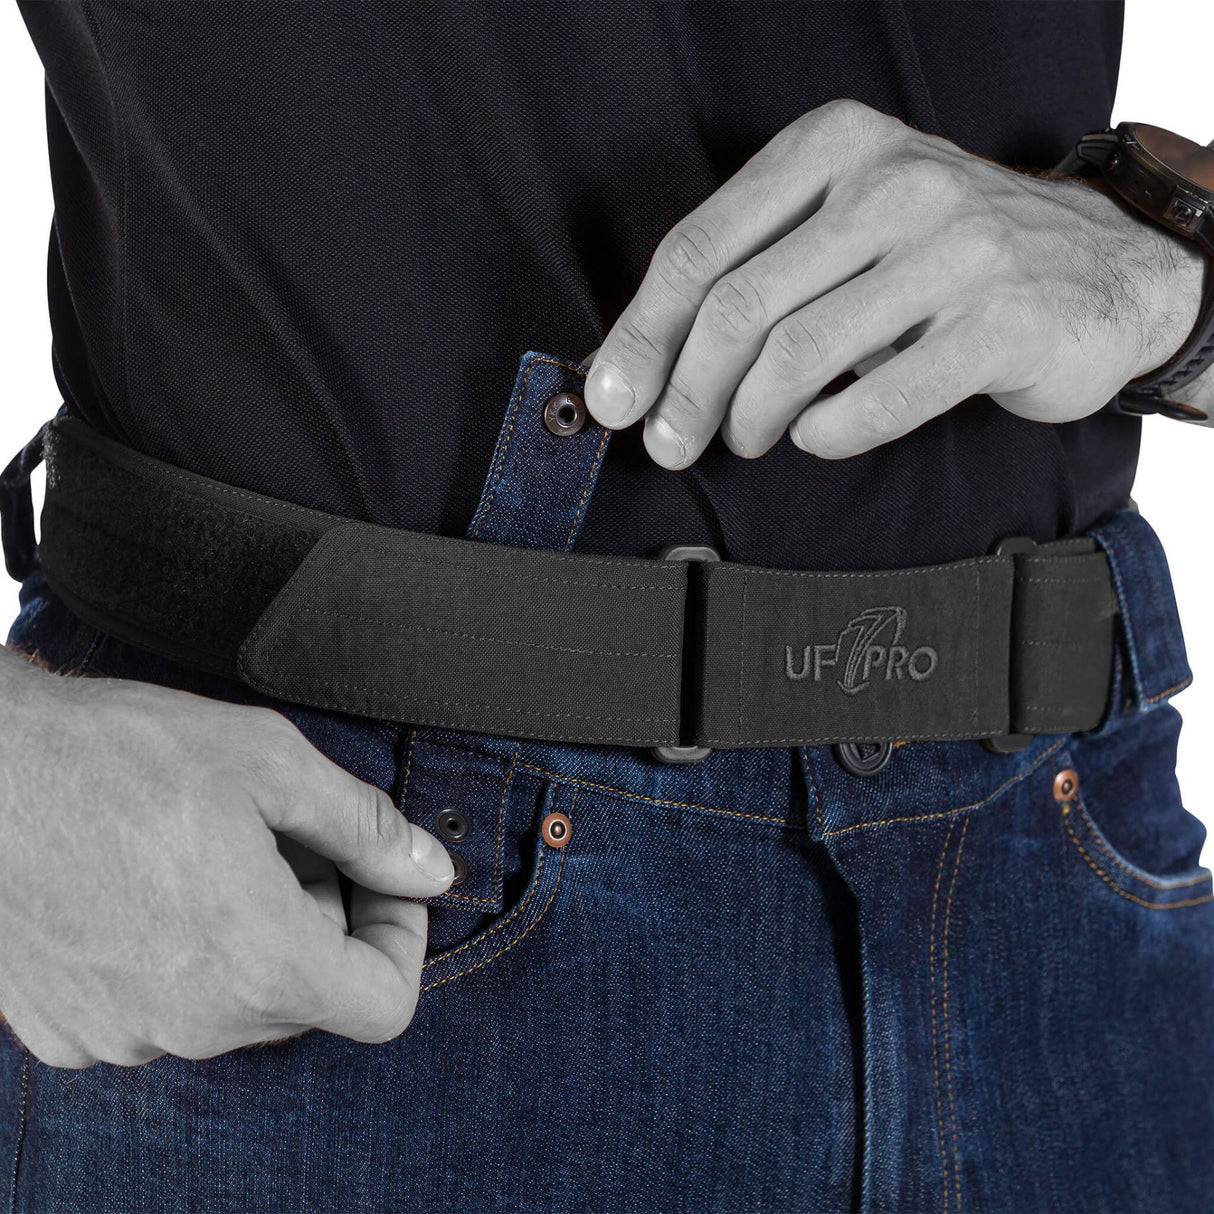 Additional Features: Belt loops with snap-button holes and durable Canadian button.